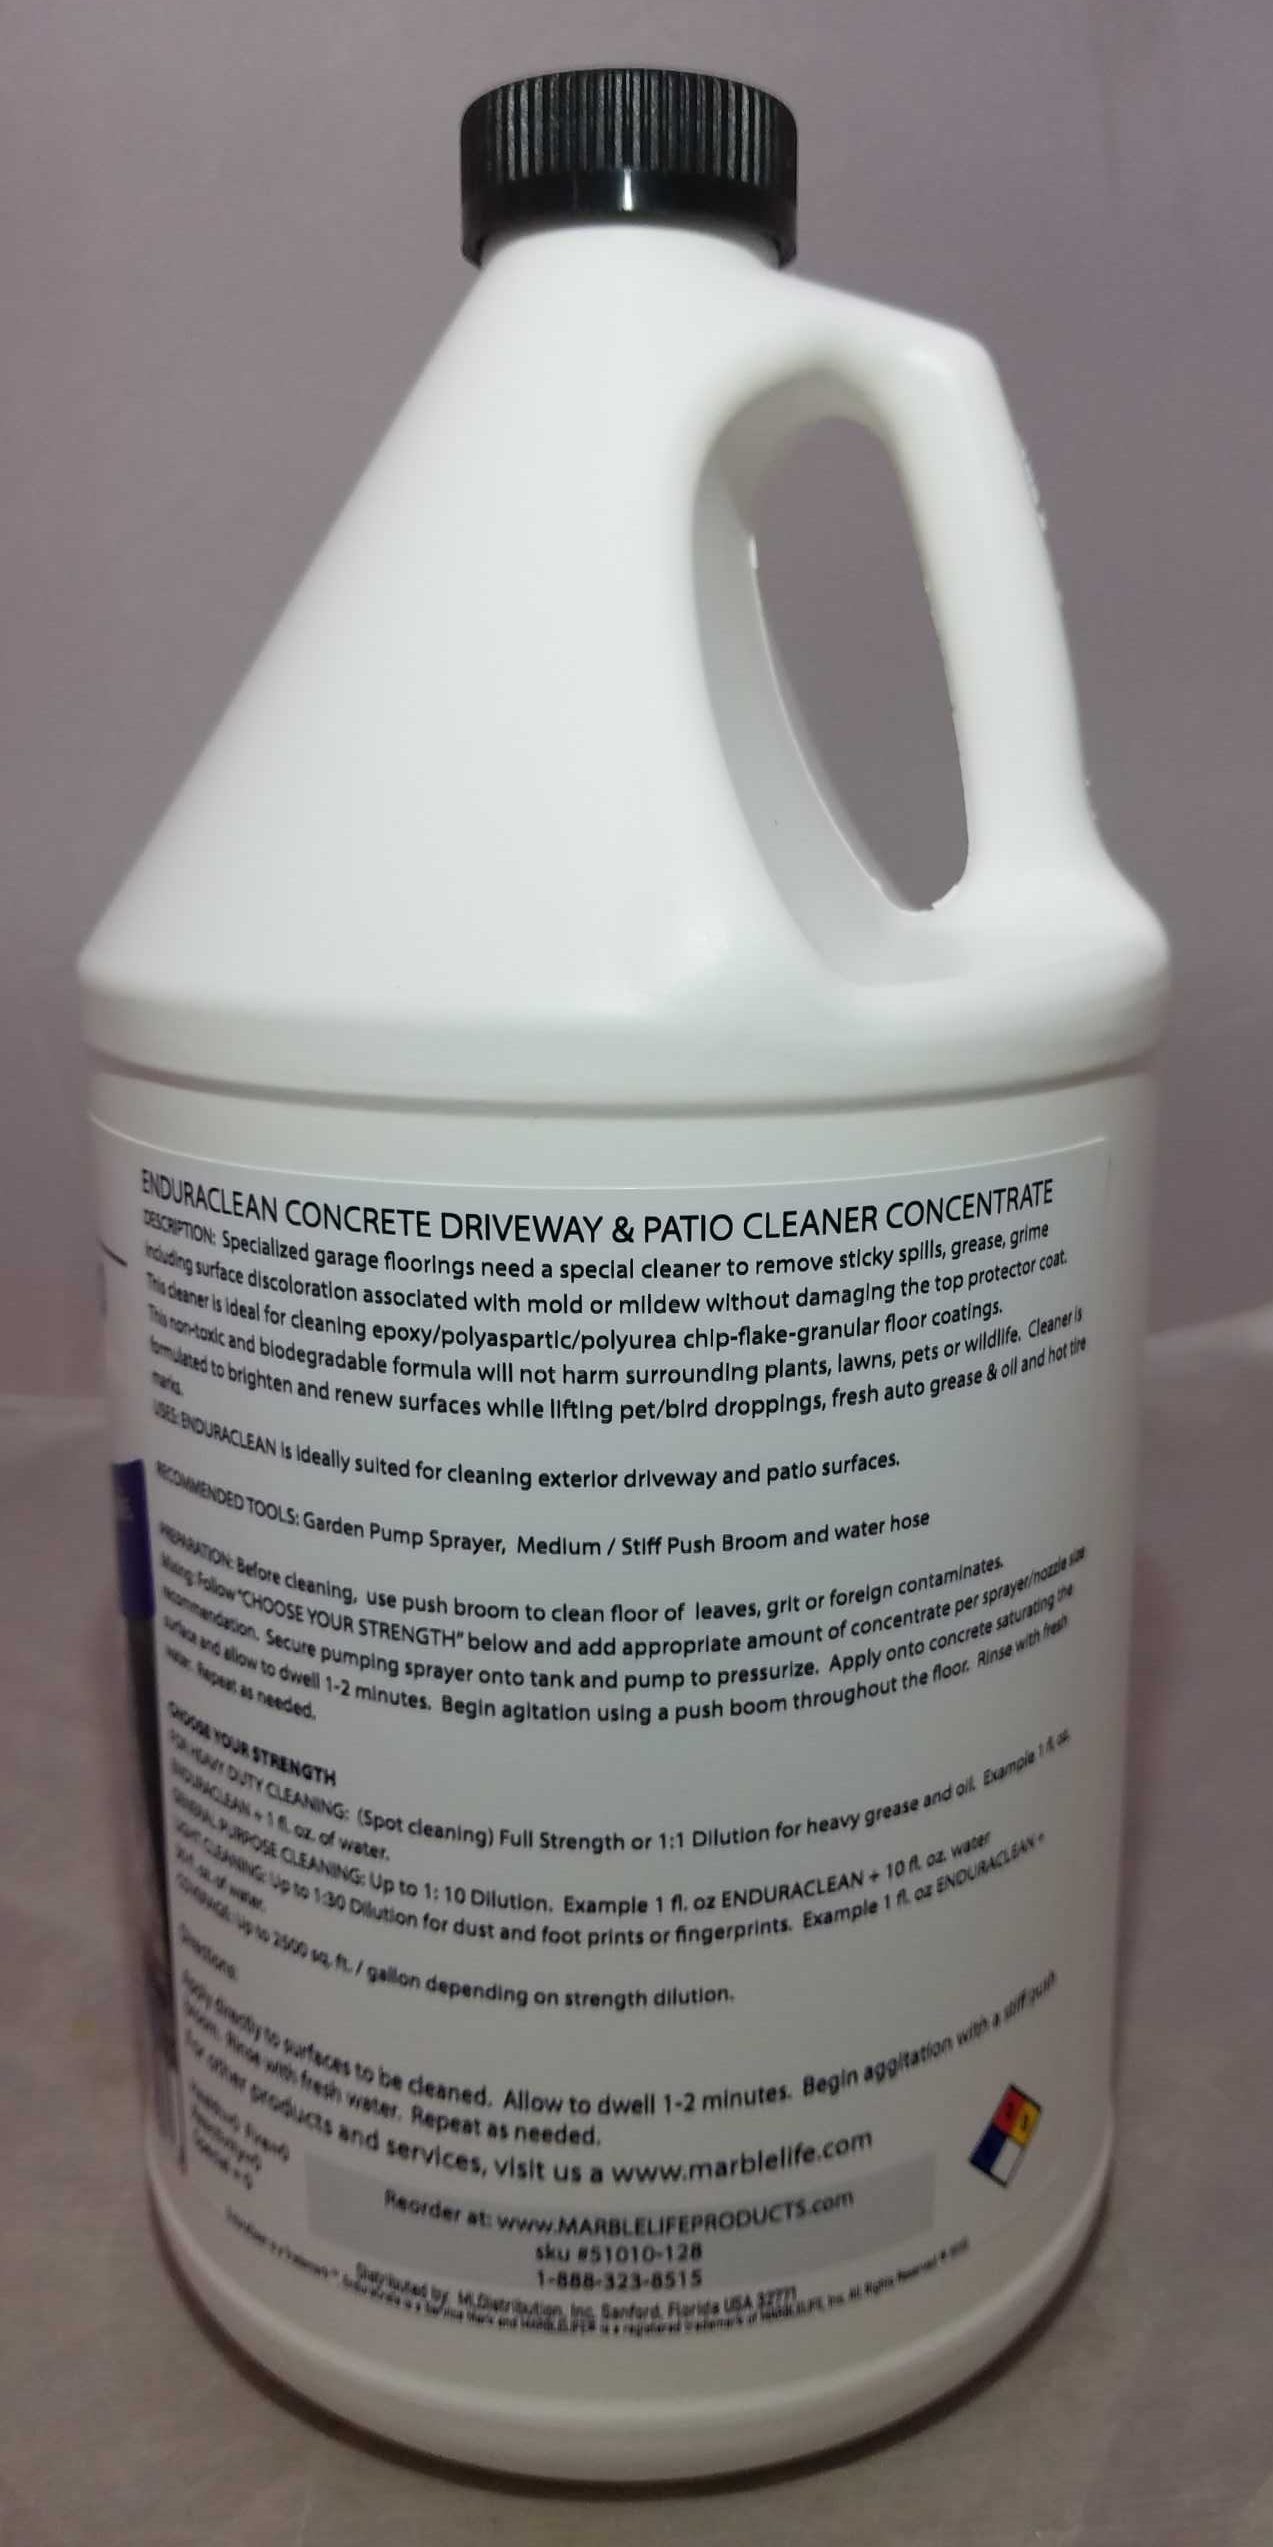 CONCRETE DRIVEWAY AND PATIO CLEANER CONCENTRATE